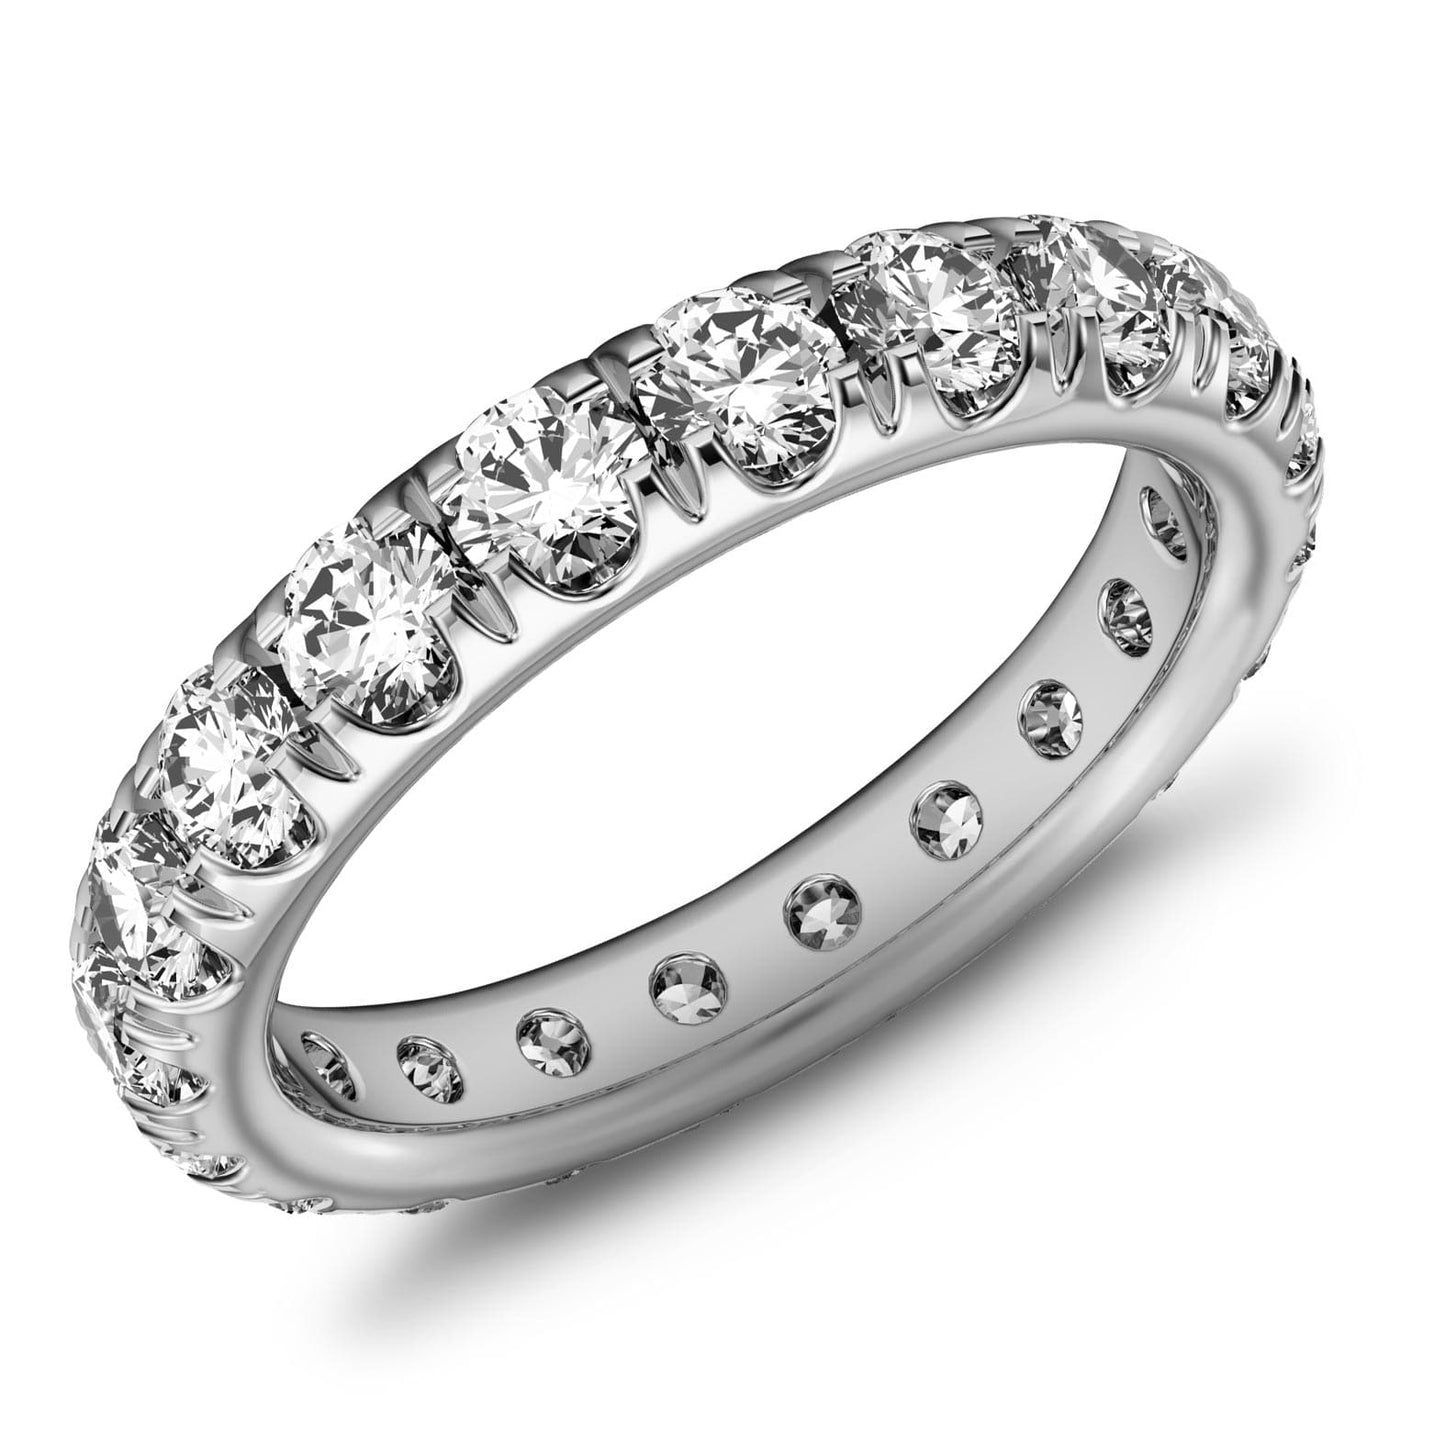 2ct French Pave Diamond Eternity Ring in 14k Gold